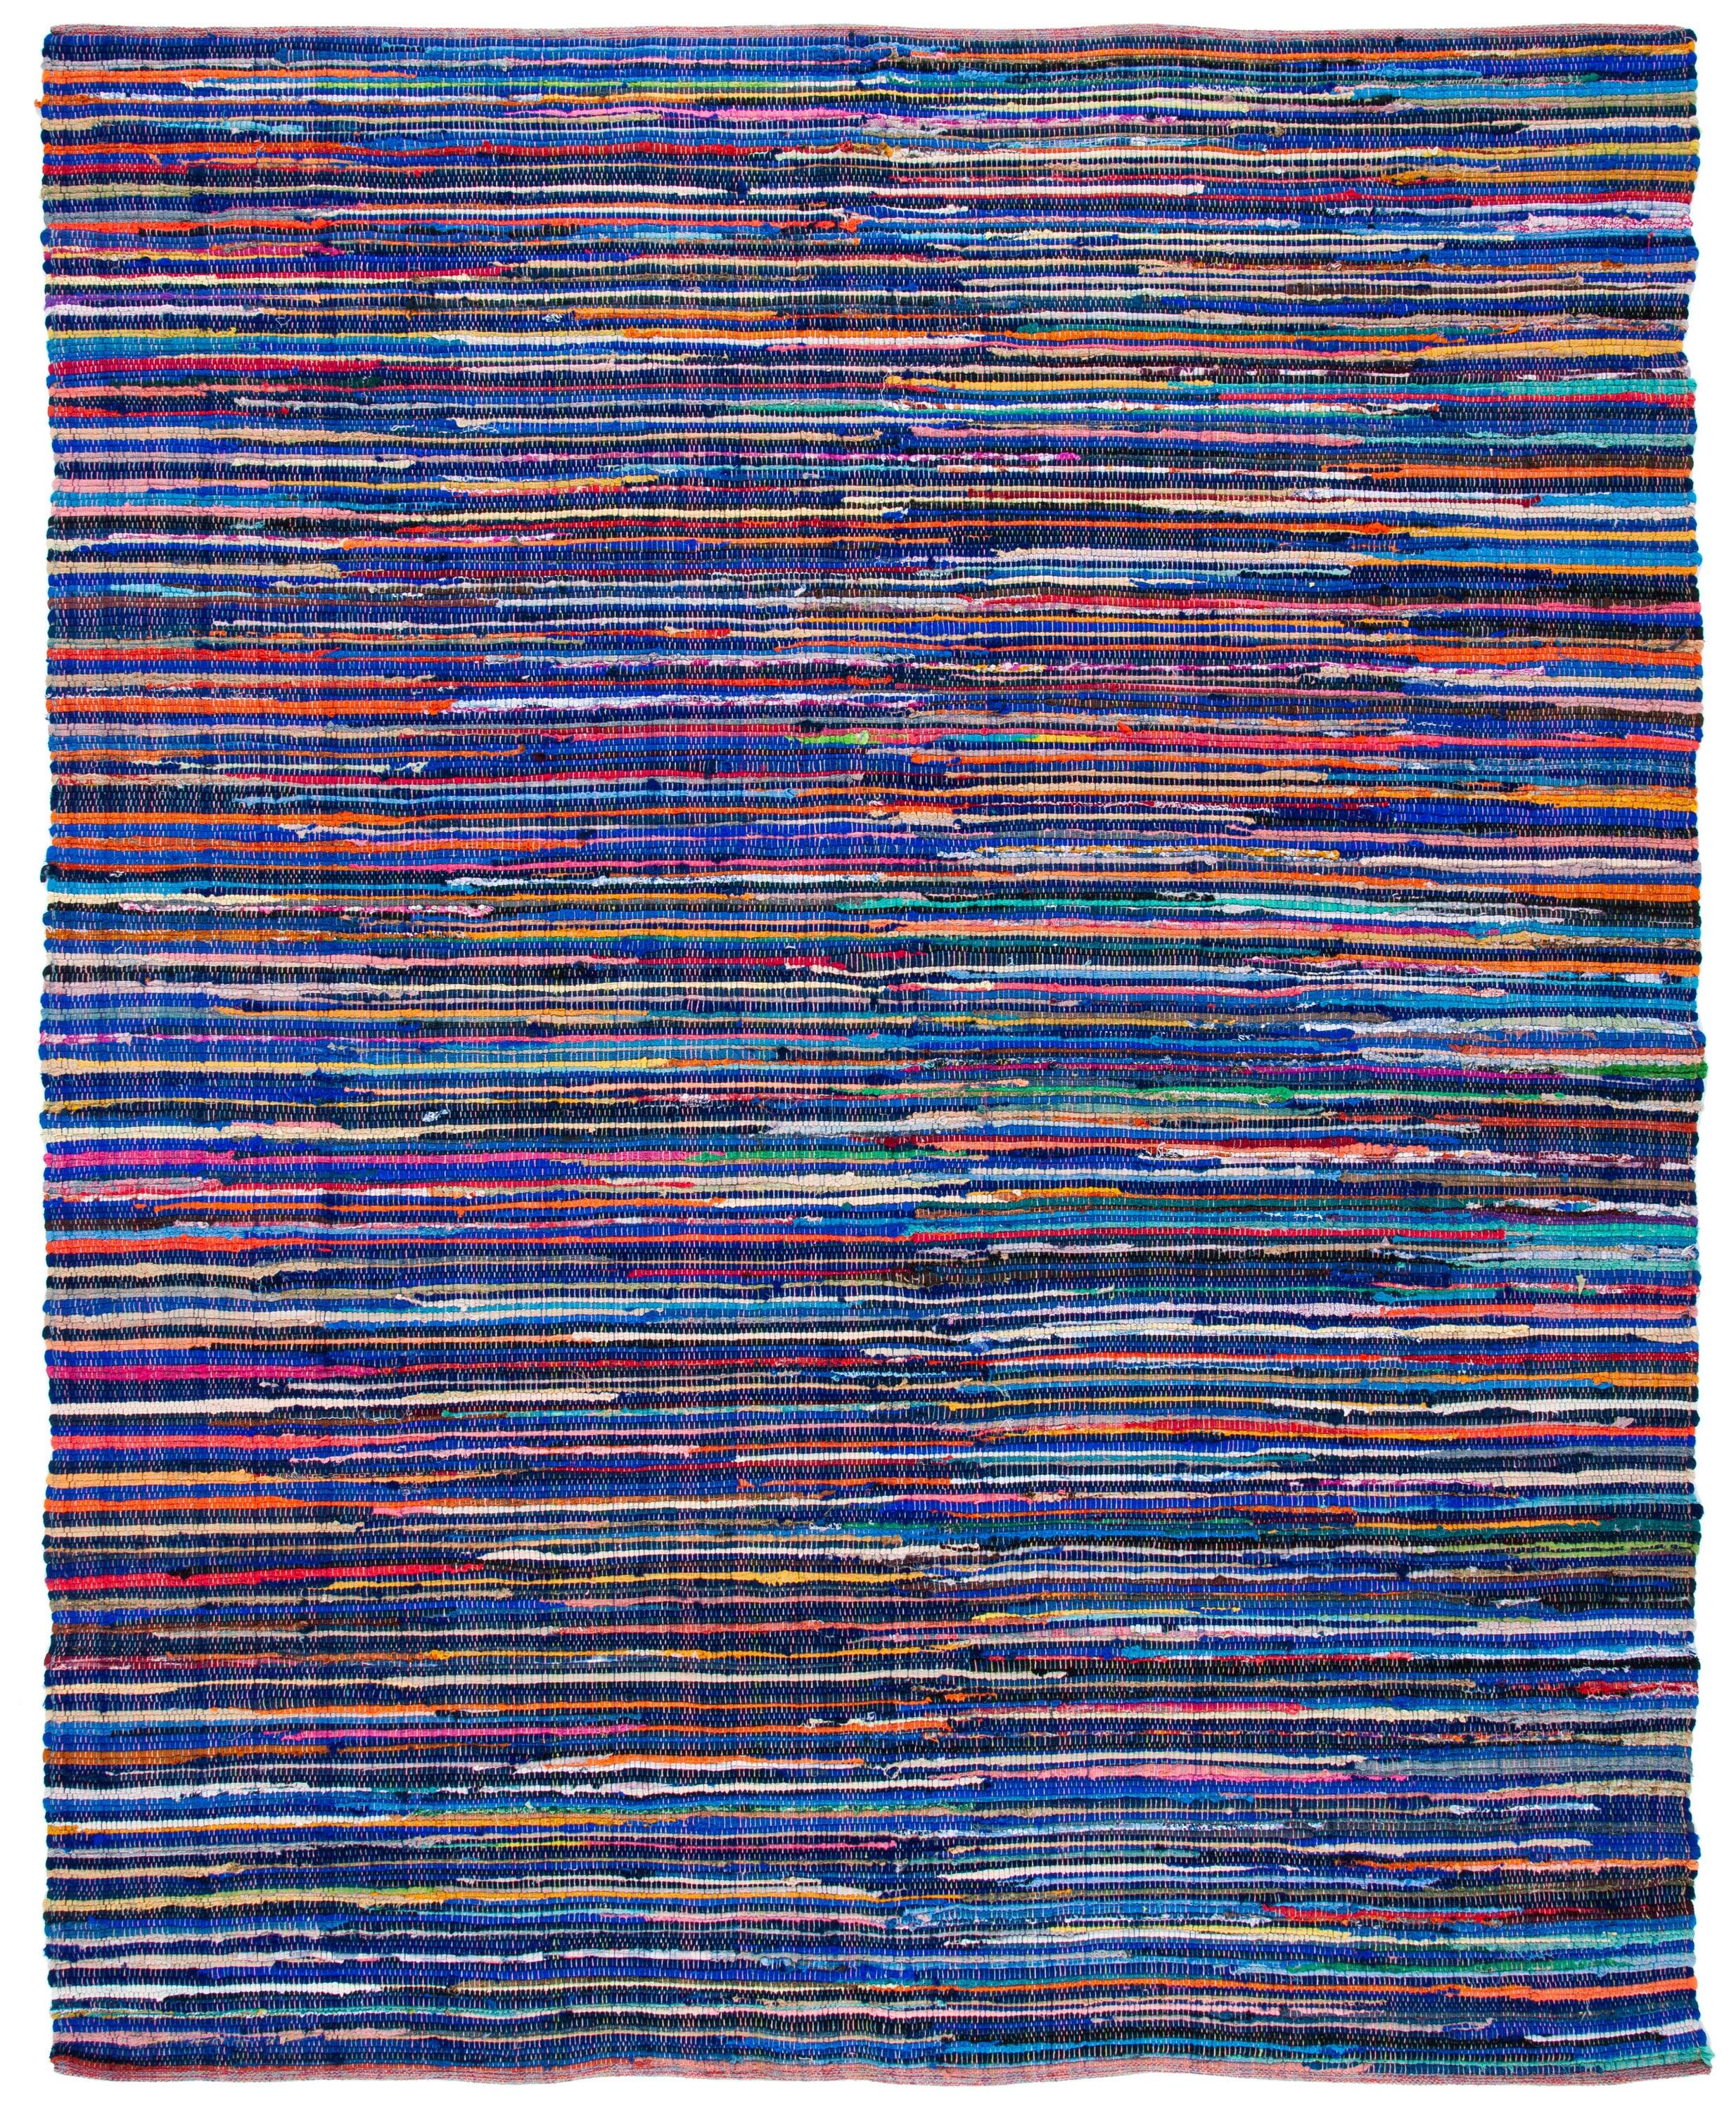 Handwoven Striped Blue and Multicolor Cotton Area Rug, 9' x 12'